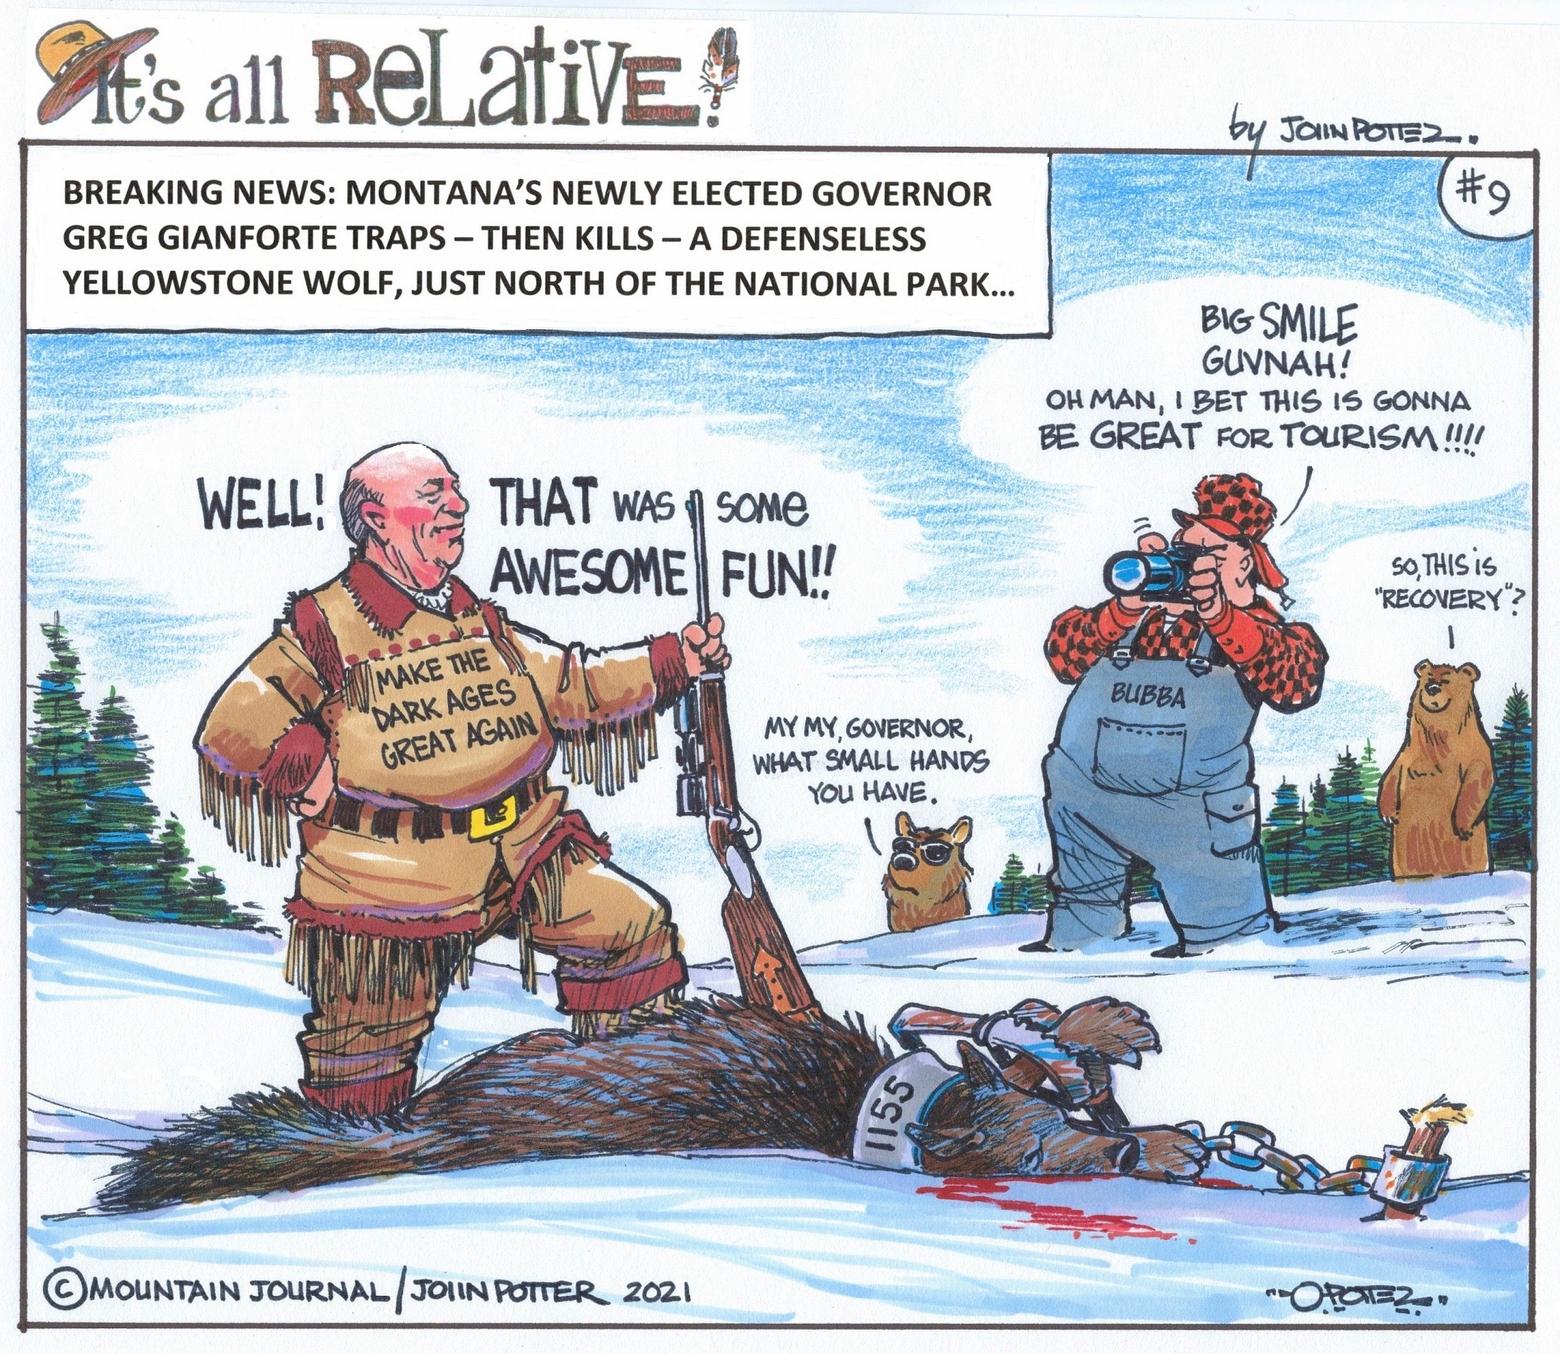 A cartoon by artist John Potter that appeared shortly after it was announced that Gov. Gianforte had trapped and shot a Yellowstone wolf that roamed beyond the park into Paradise Valley, Montana. Of note is that Potter was present in 1995 and oversaw traditional indigenous prayer ceremony welcoming wolves back to the park after a 60-year absence.